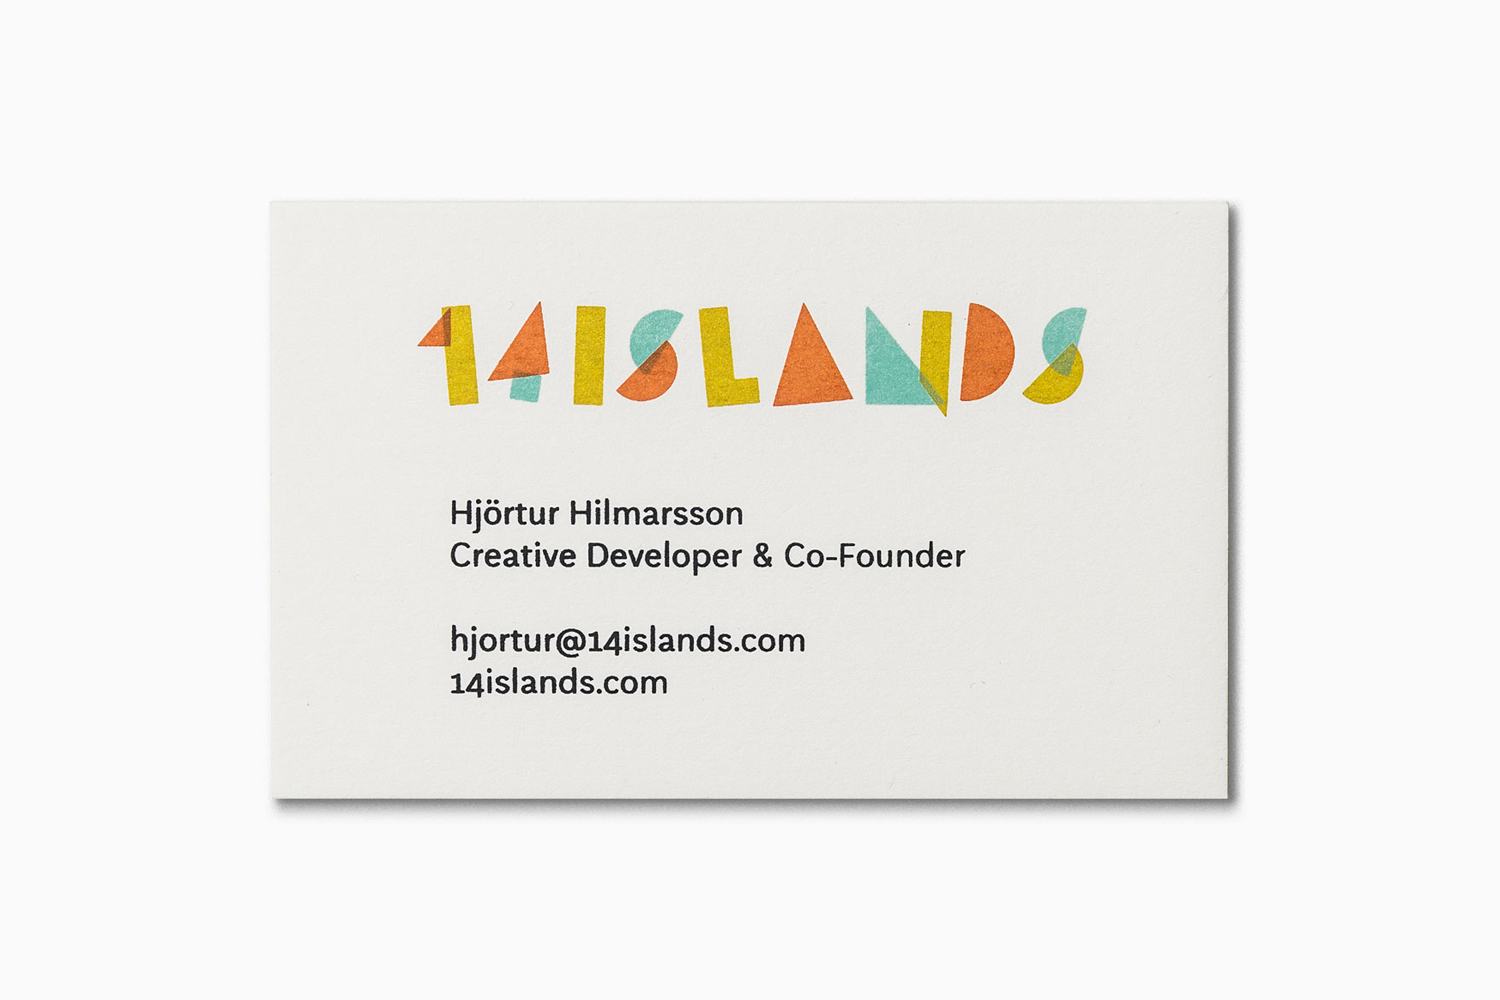 Logotype and business card by Bedow for Swedish creative development studio 14islands